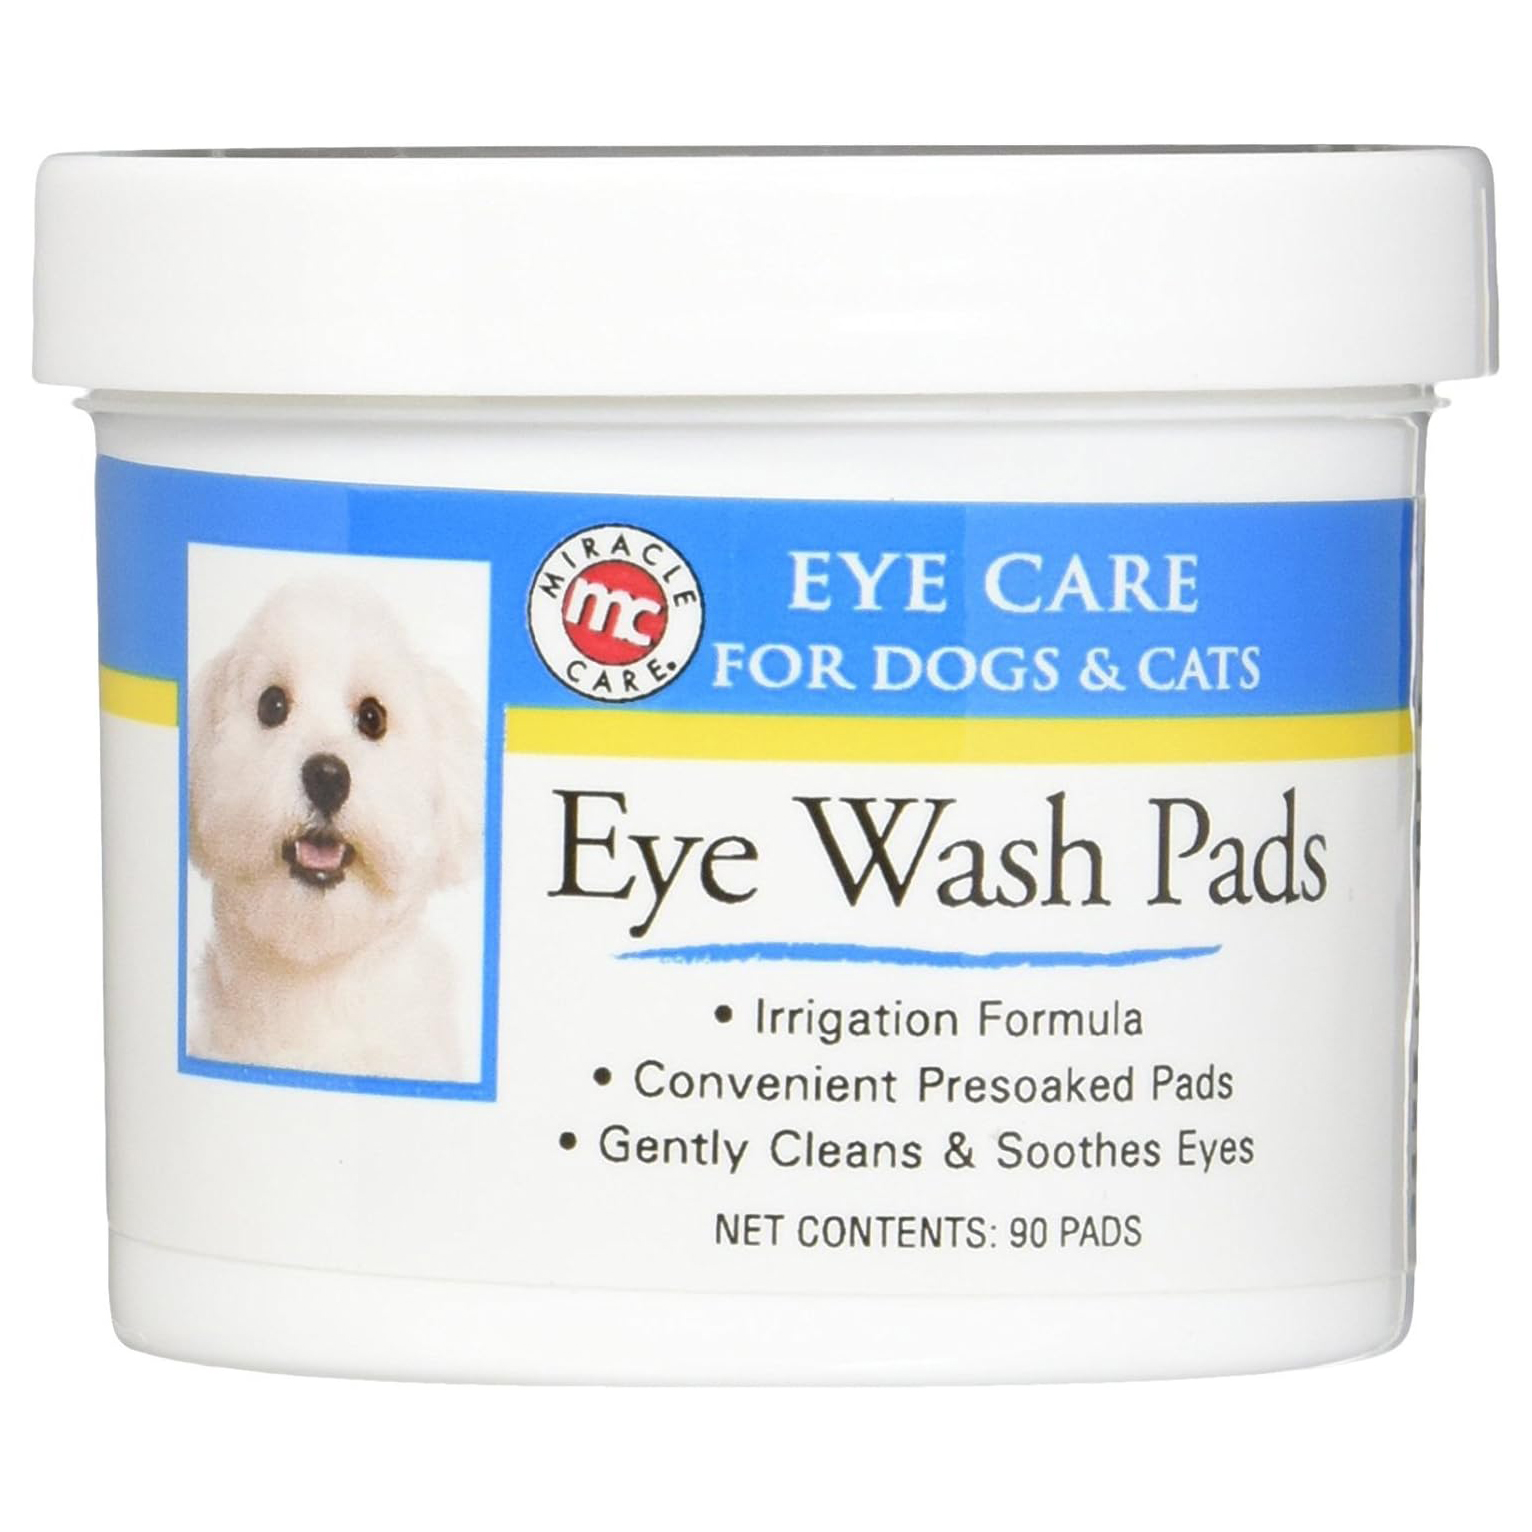 Miracle Care Eye Wash Pads for Dogs